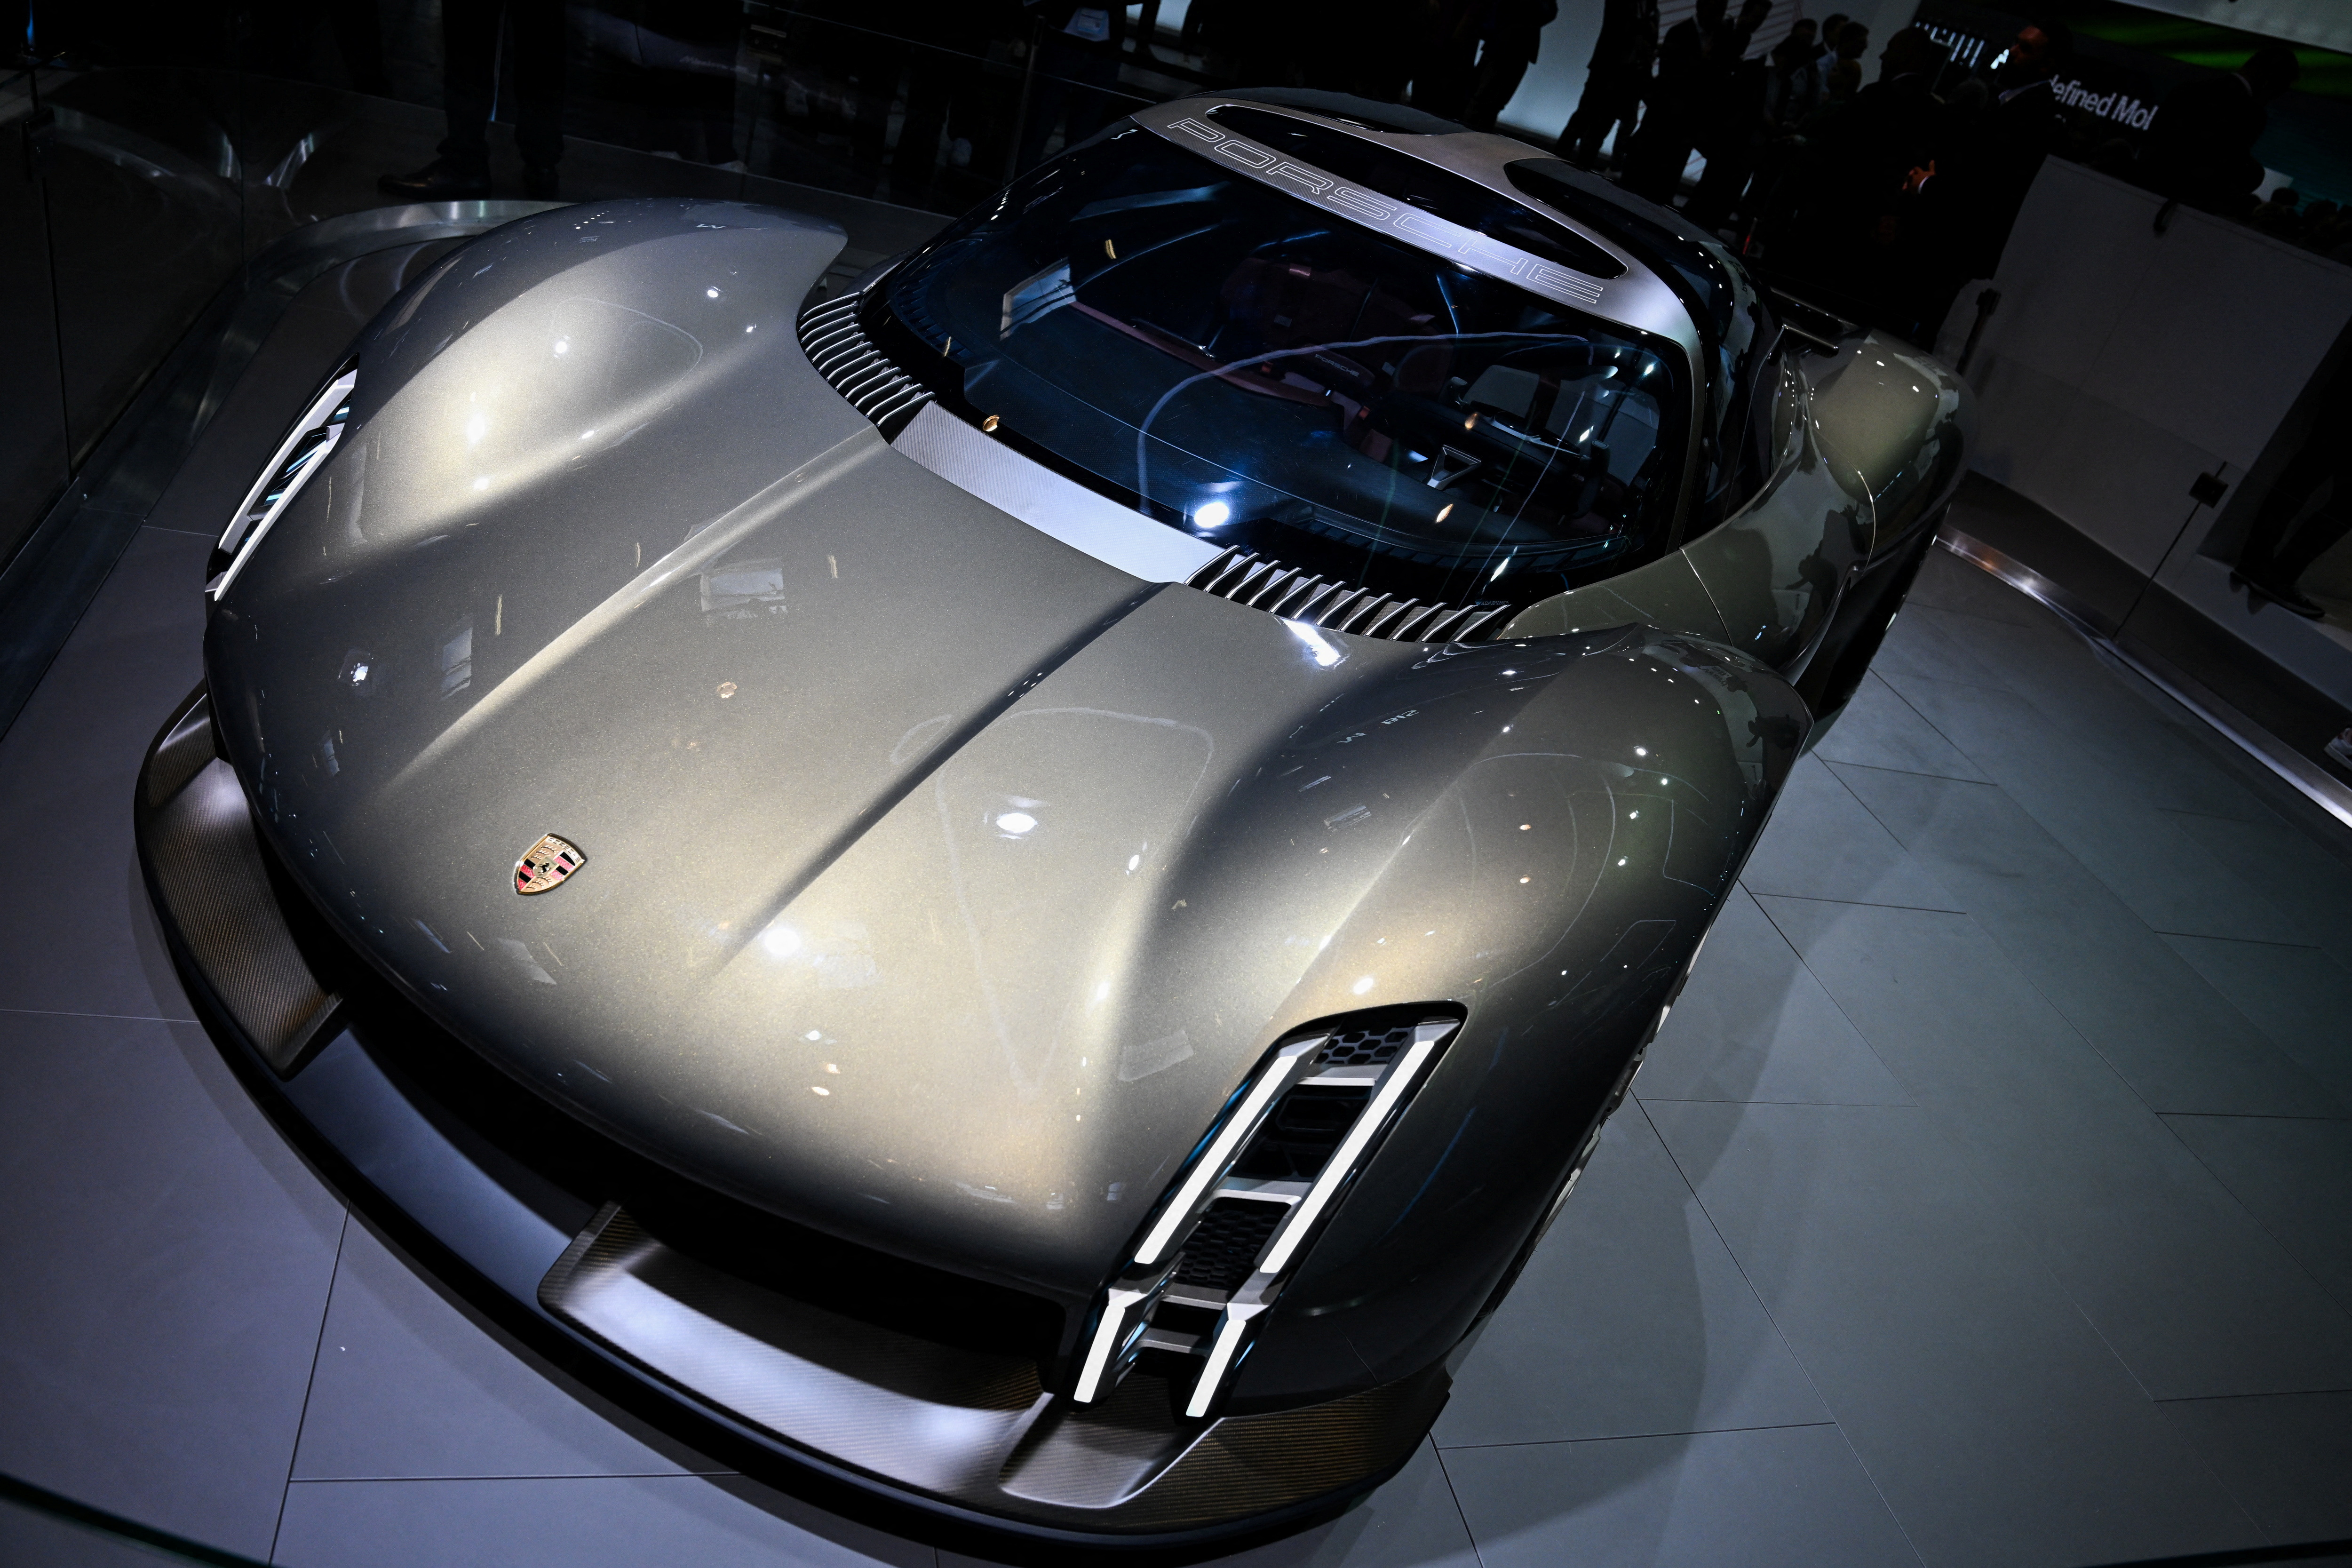 Porsche warns luxury not immune to economic woes as shares hit 1-year low